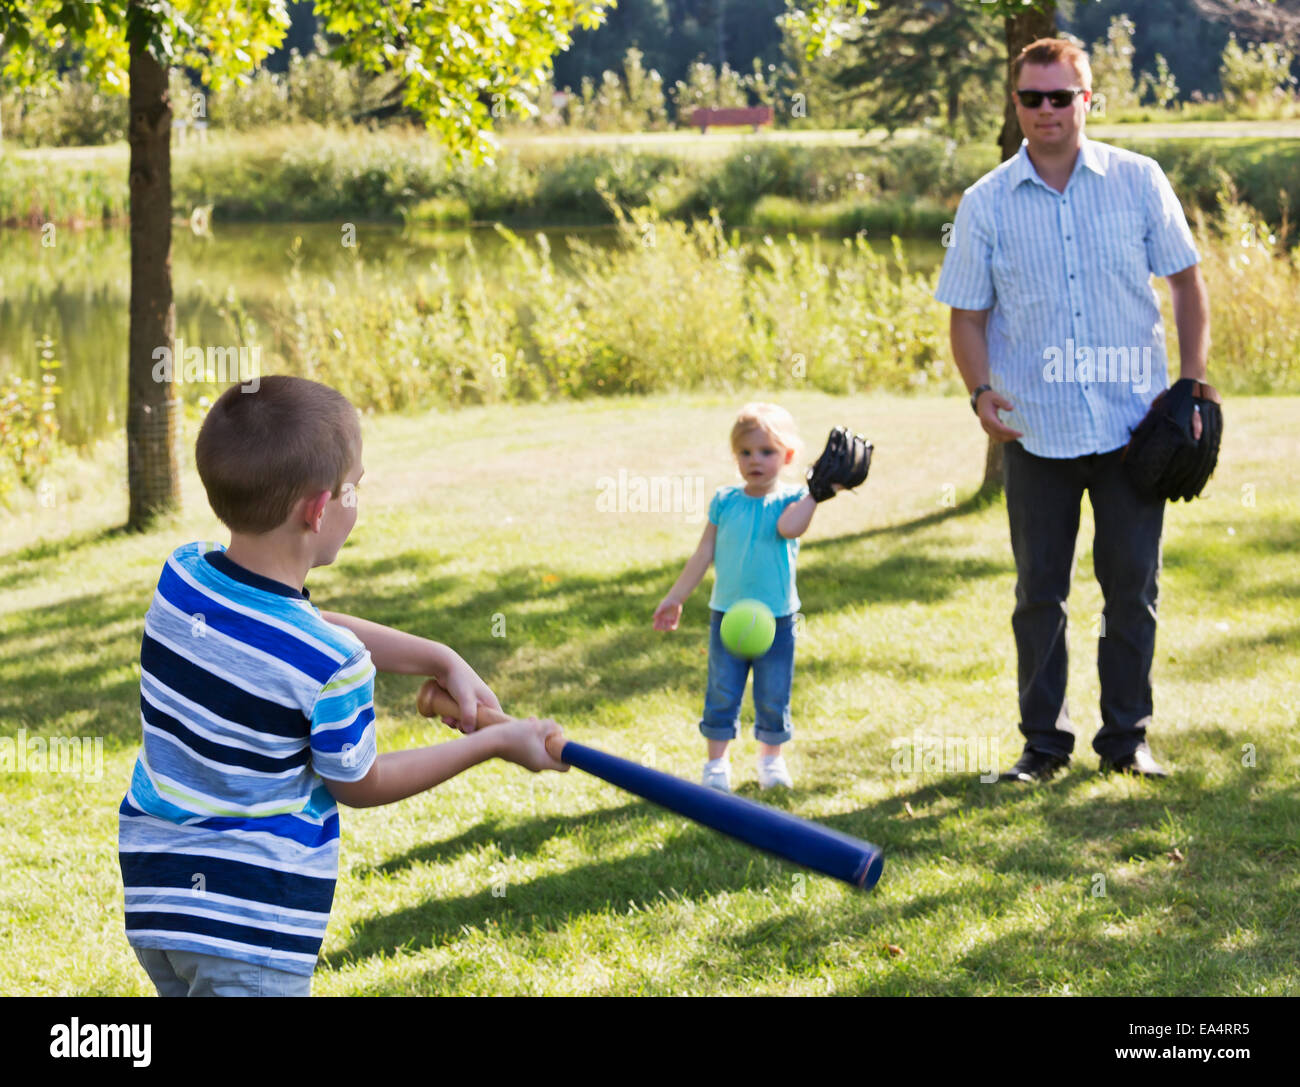 Father, son and daughter playing baseball in a park; Edmonton, Alberta, Canada Stock Photo